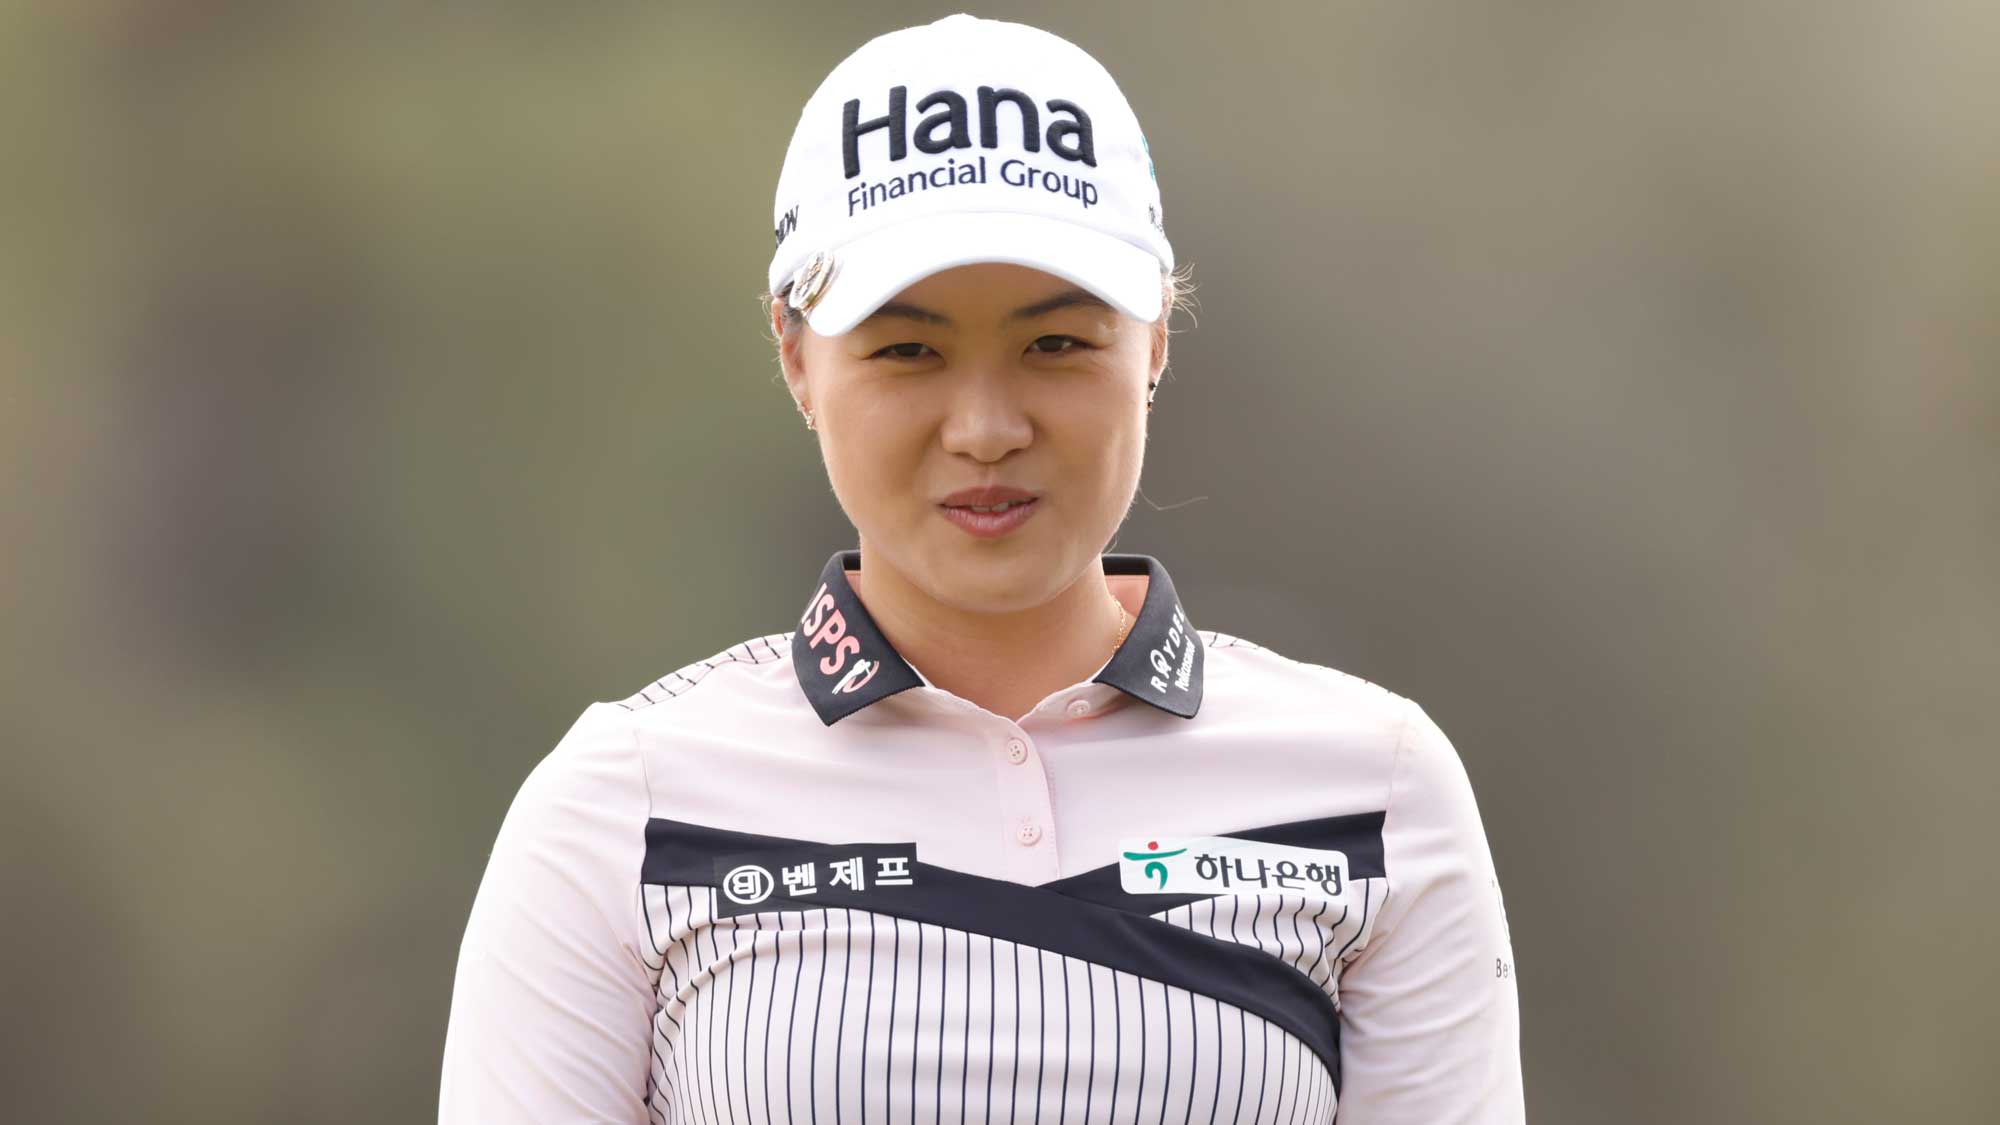 Minjee Lee of Australia looks on from the third tee during the first round of the CME Group Tour Championship